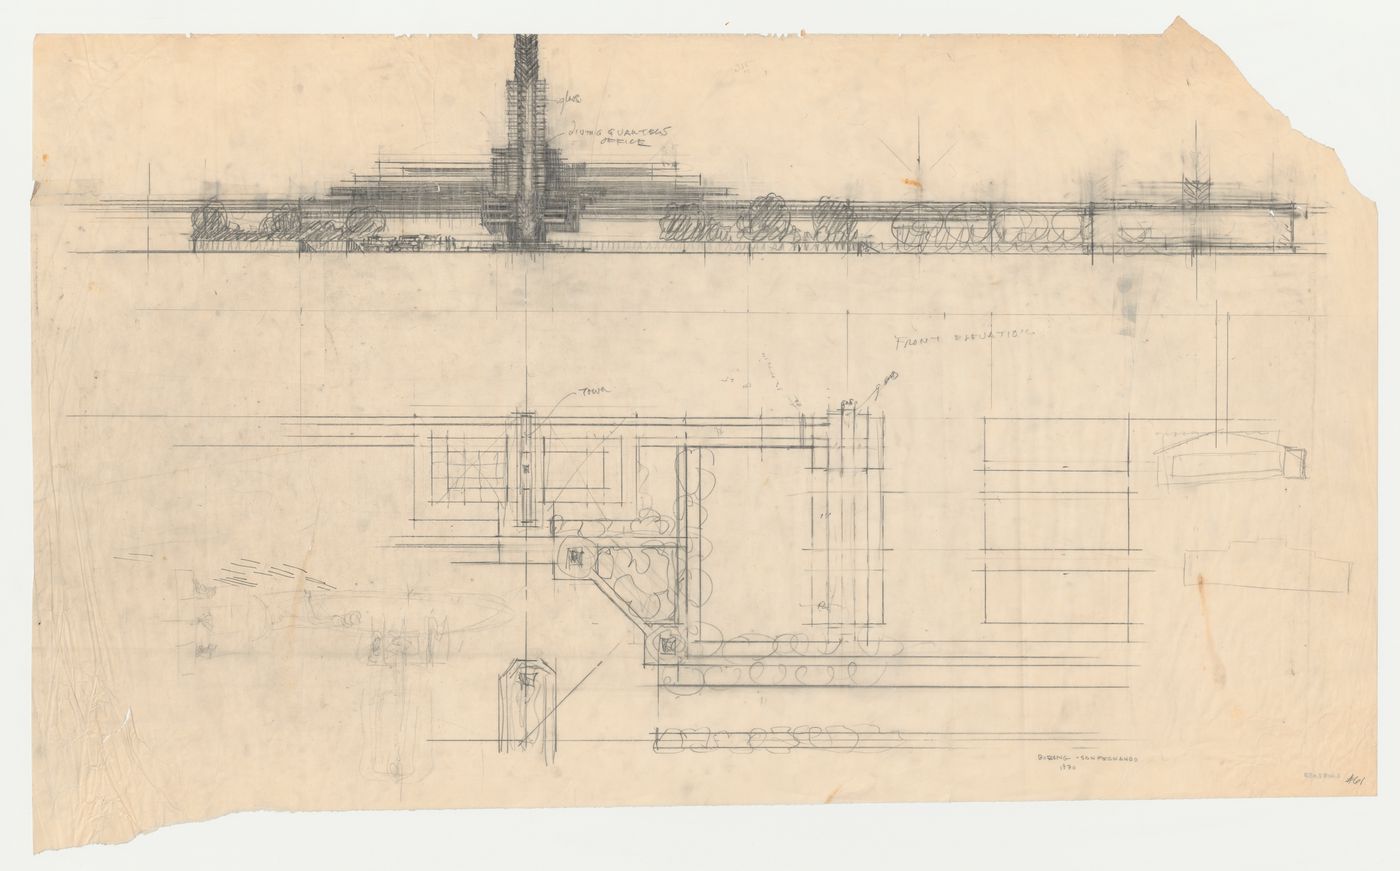 Partial elevation and plan for an airport control tower and buildings